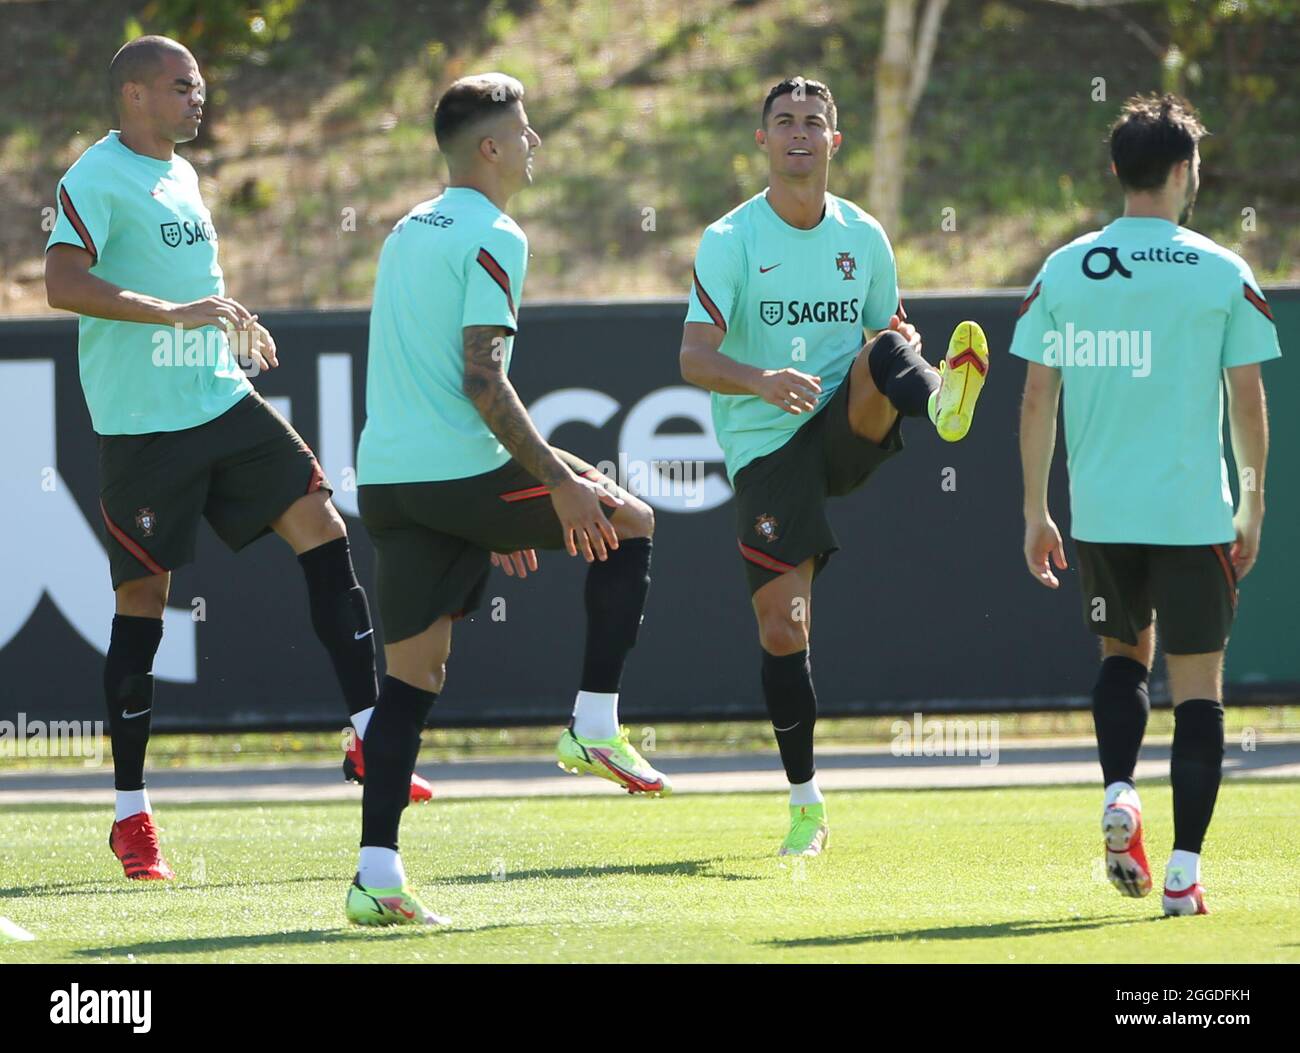 11837853 - UEFA European Qualifiers - Portugal training sessionSearch